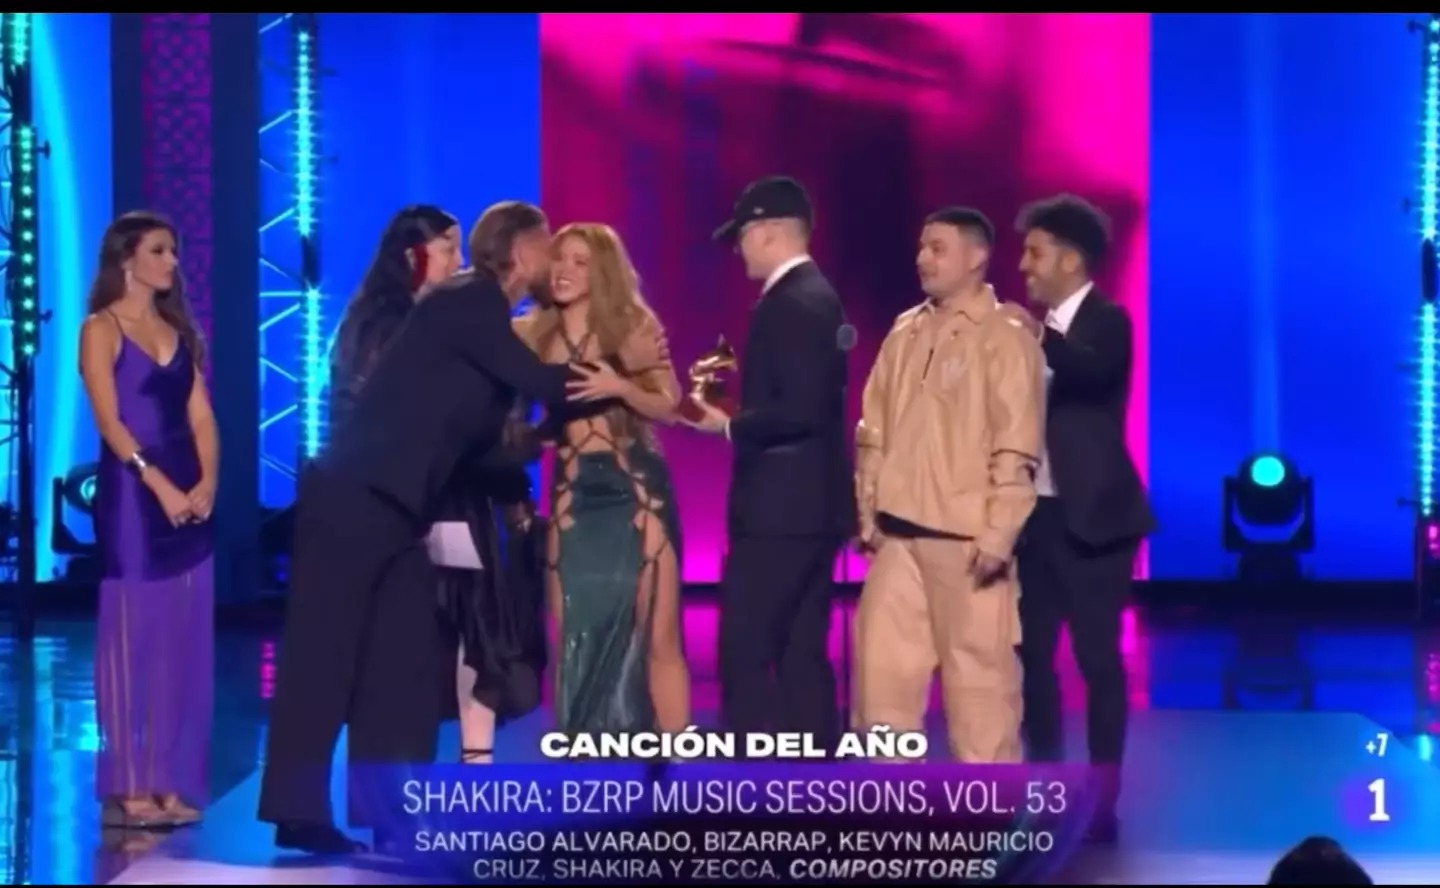 Sergio Ramos was on stage to present Shakira with her award.